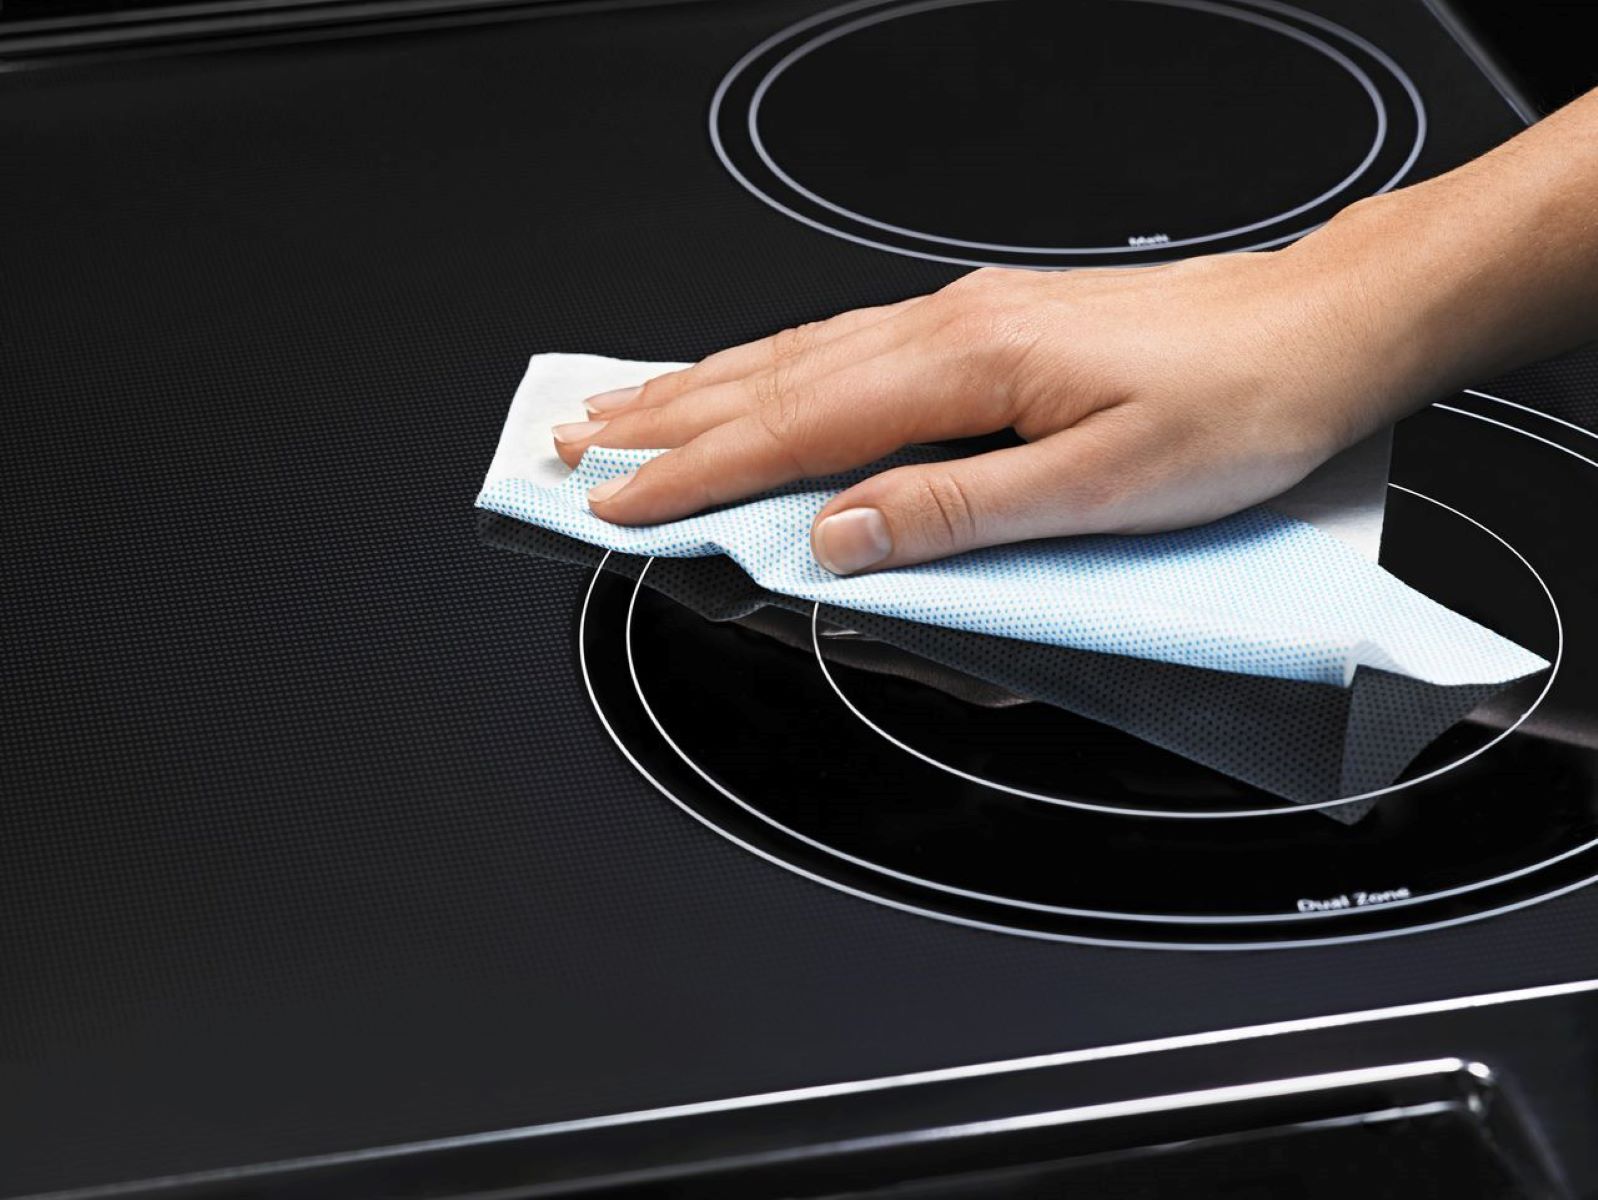 How To Prevent Scratches On Glass Cooktop